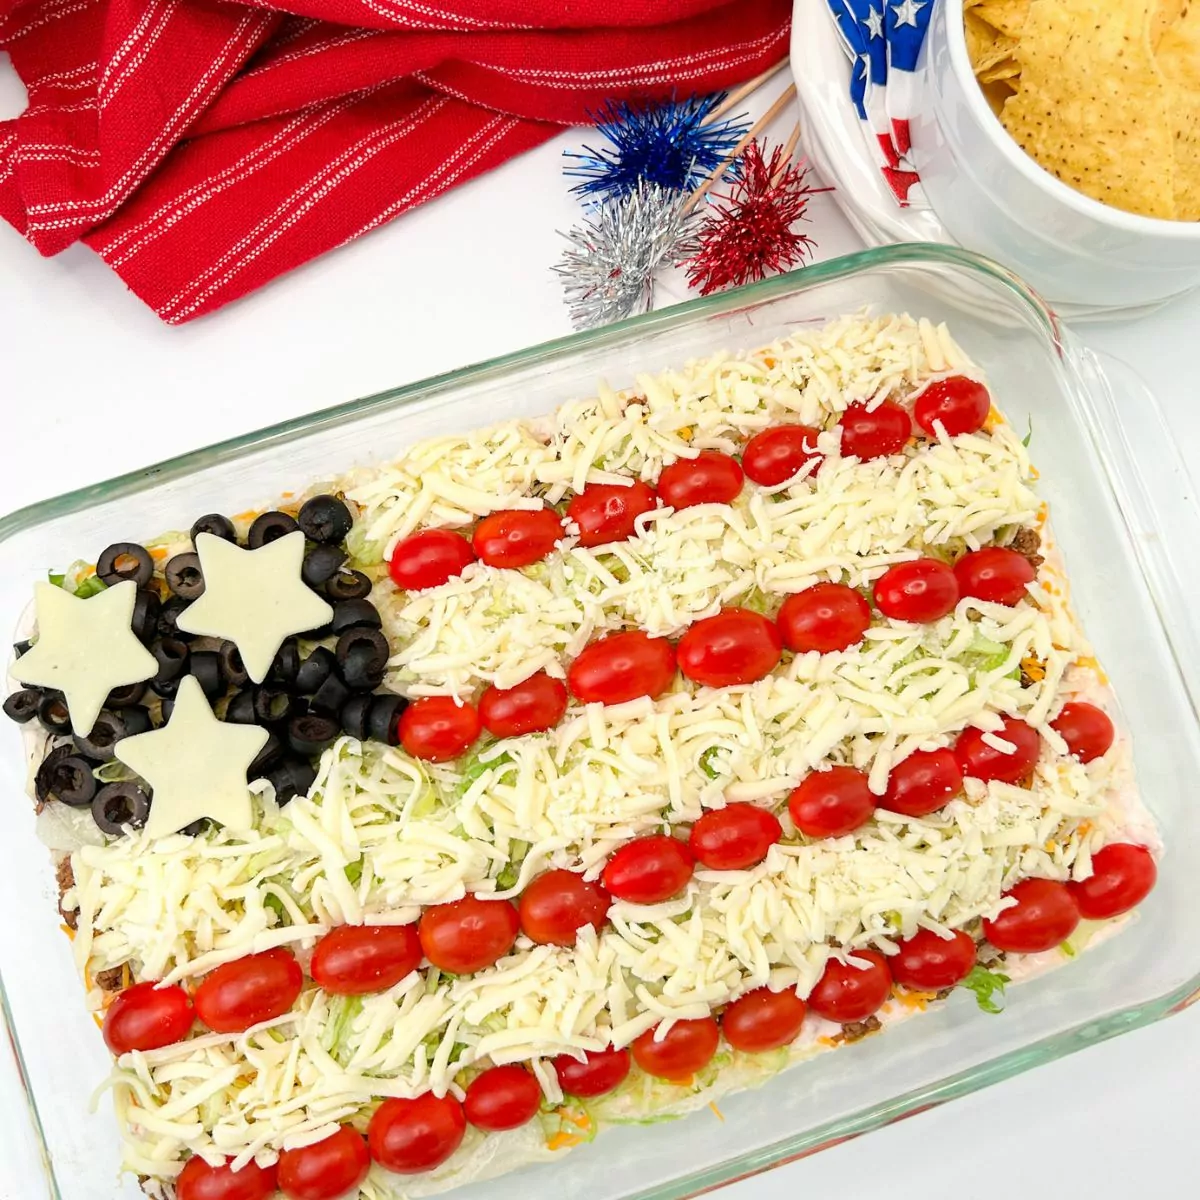 A delicious arranged in a casserole dish, showcasing the red, white, and blue colors of the American flag.